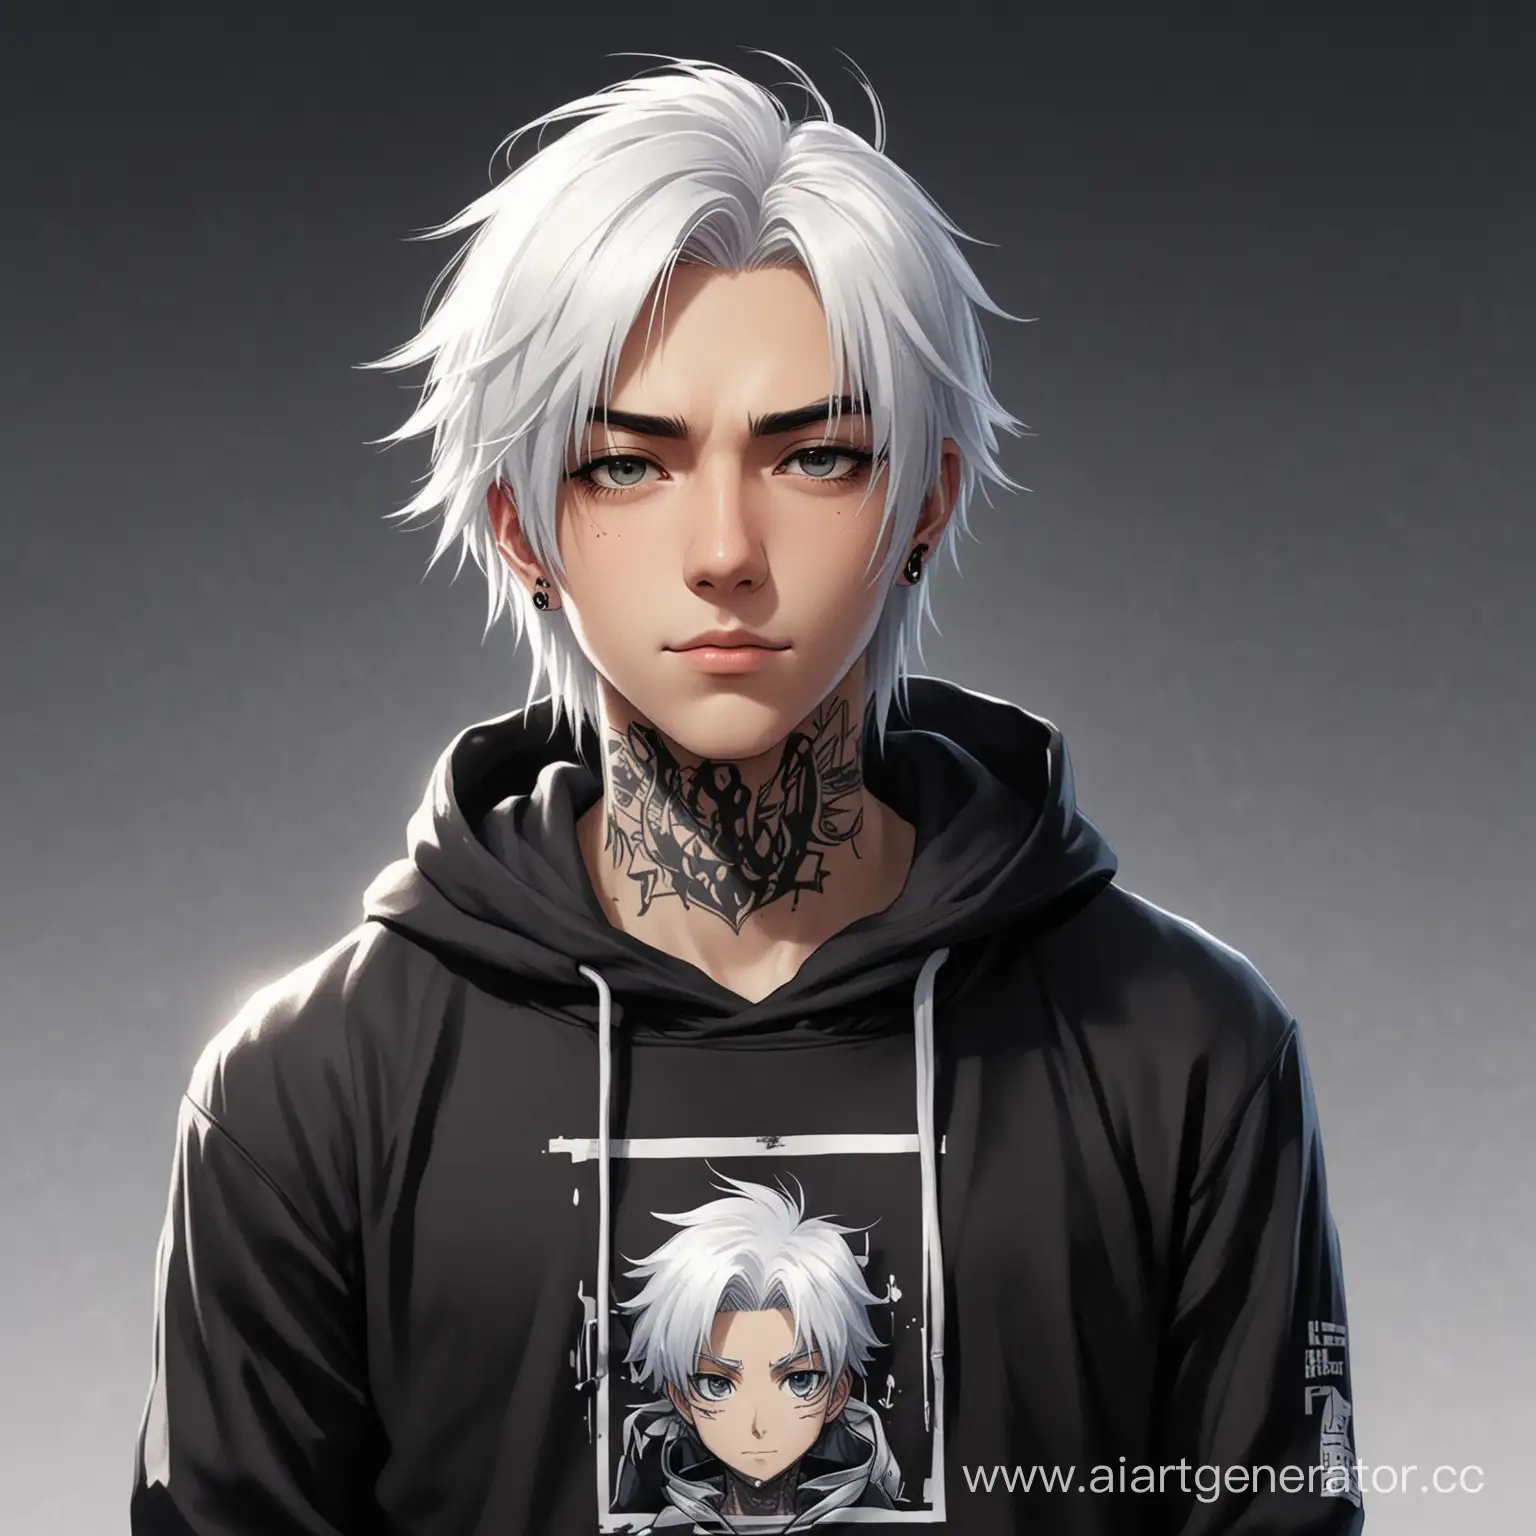 Anime-Character-in-Urban-Alley-White-Hair-Black-Hoodie-and-Neck-Tattoo